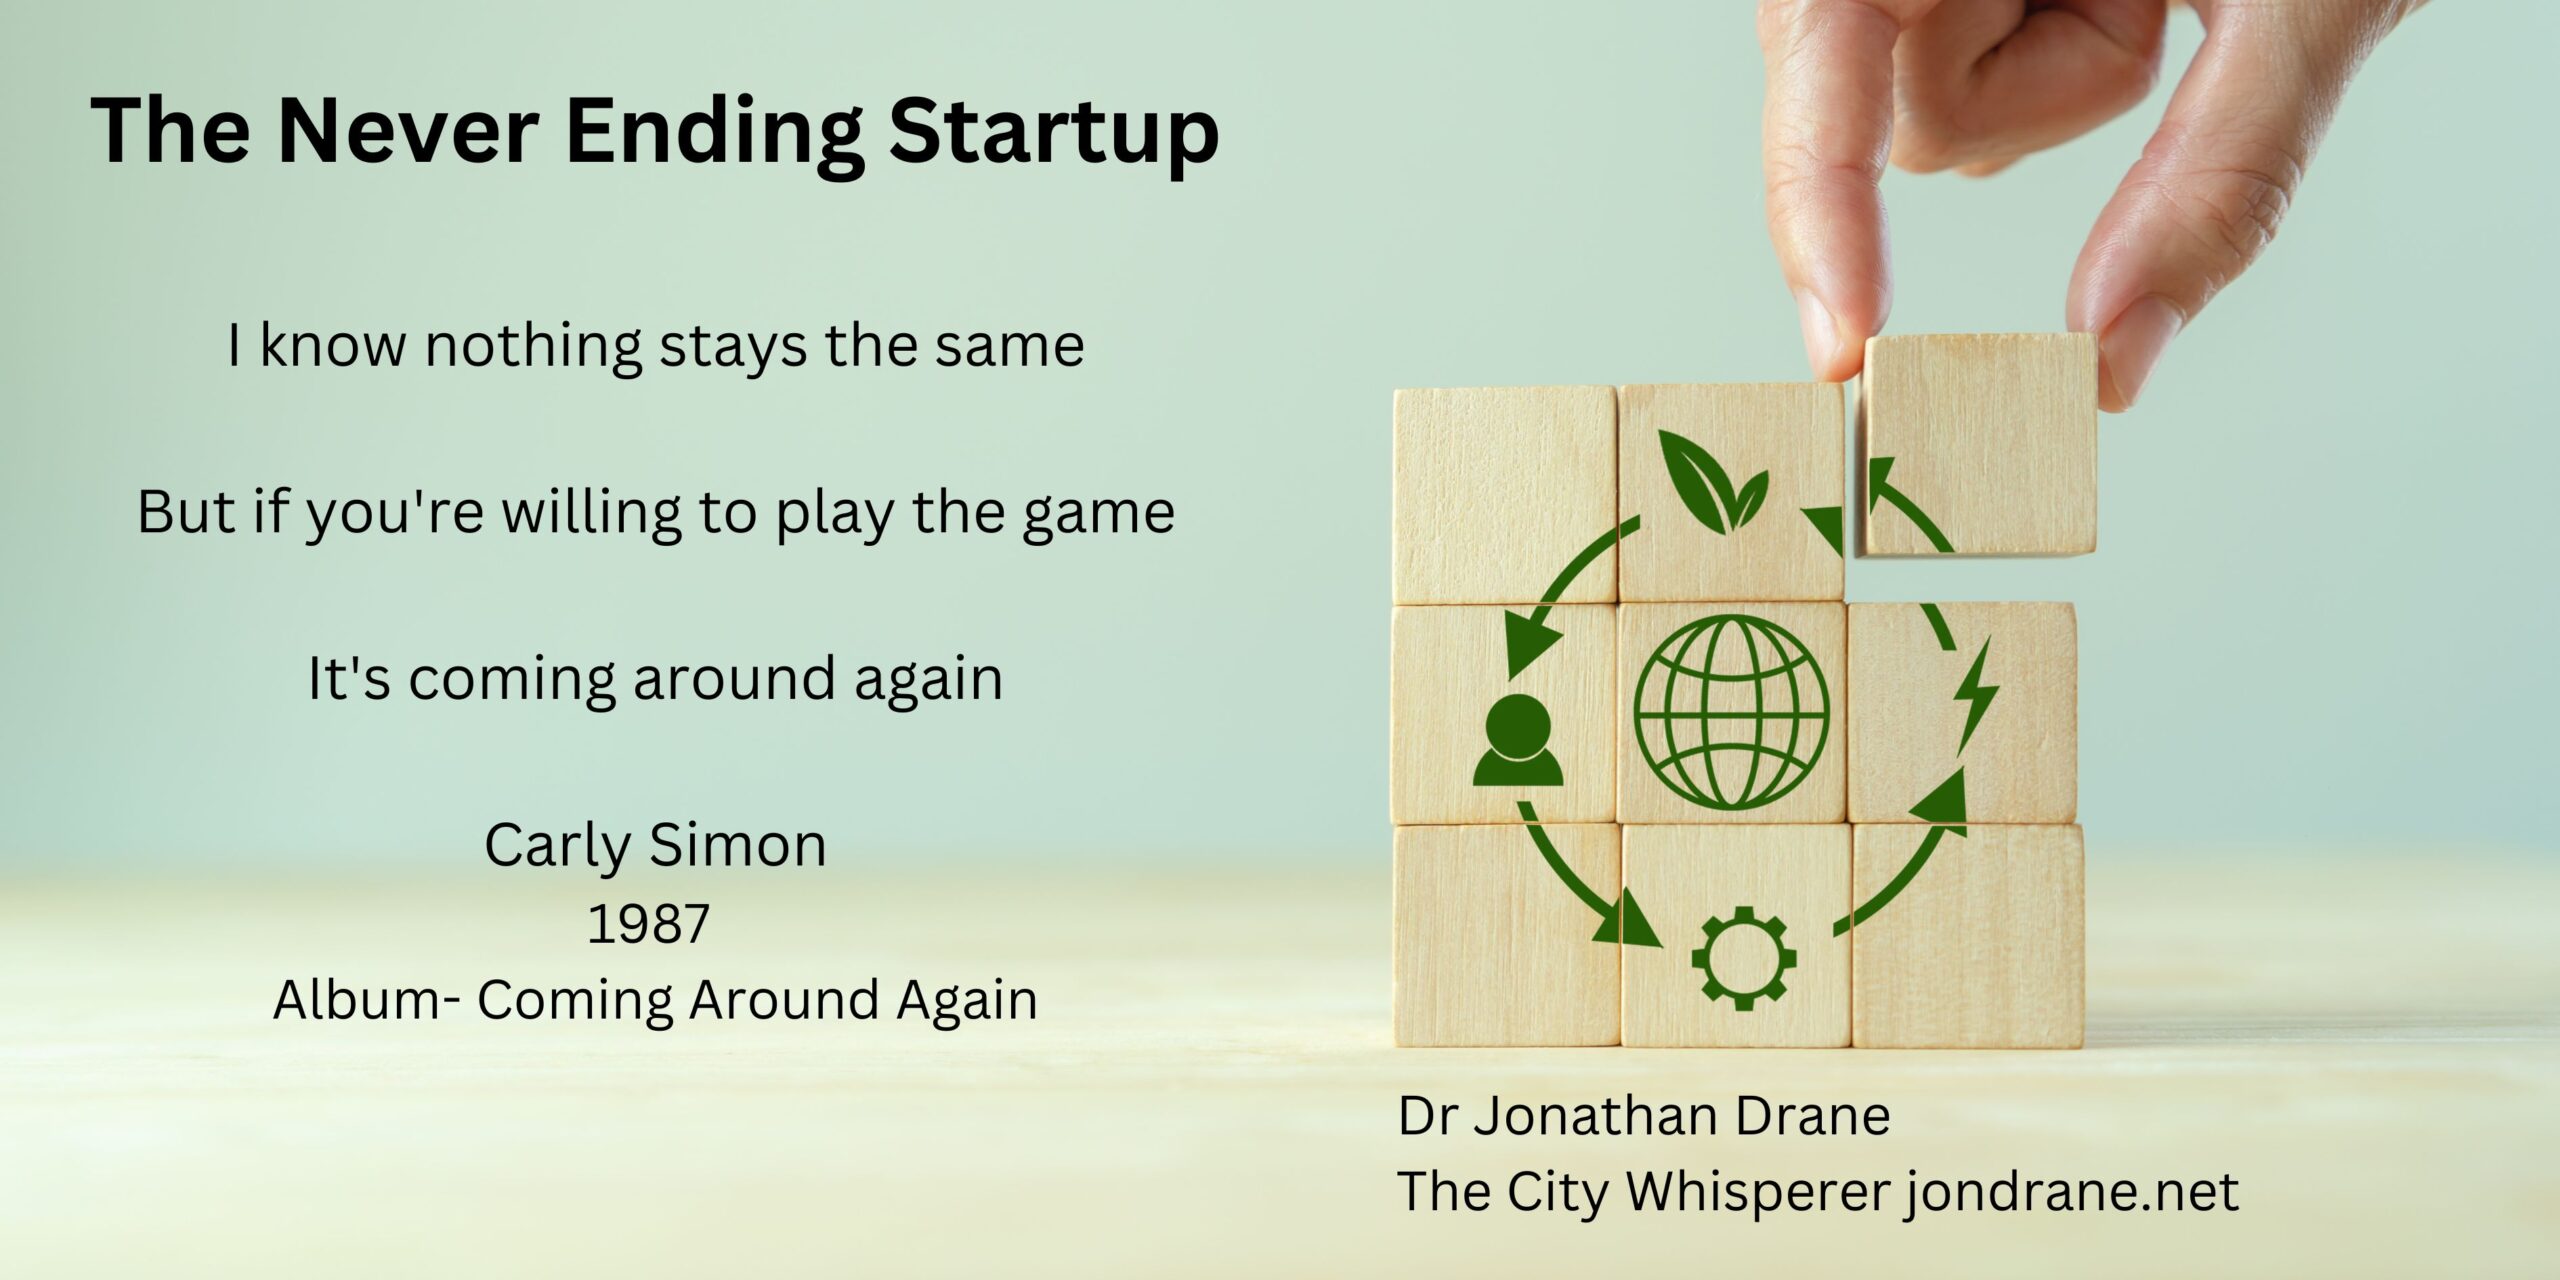 The Never Ending Startup Podcast by Dr Jon Drane The City Whisperer. on jondrane.net Startup journey and stories of longevity Quote Carly Simon - Song- Its coming around again